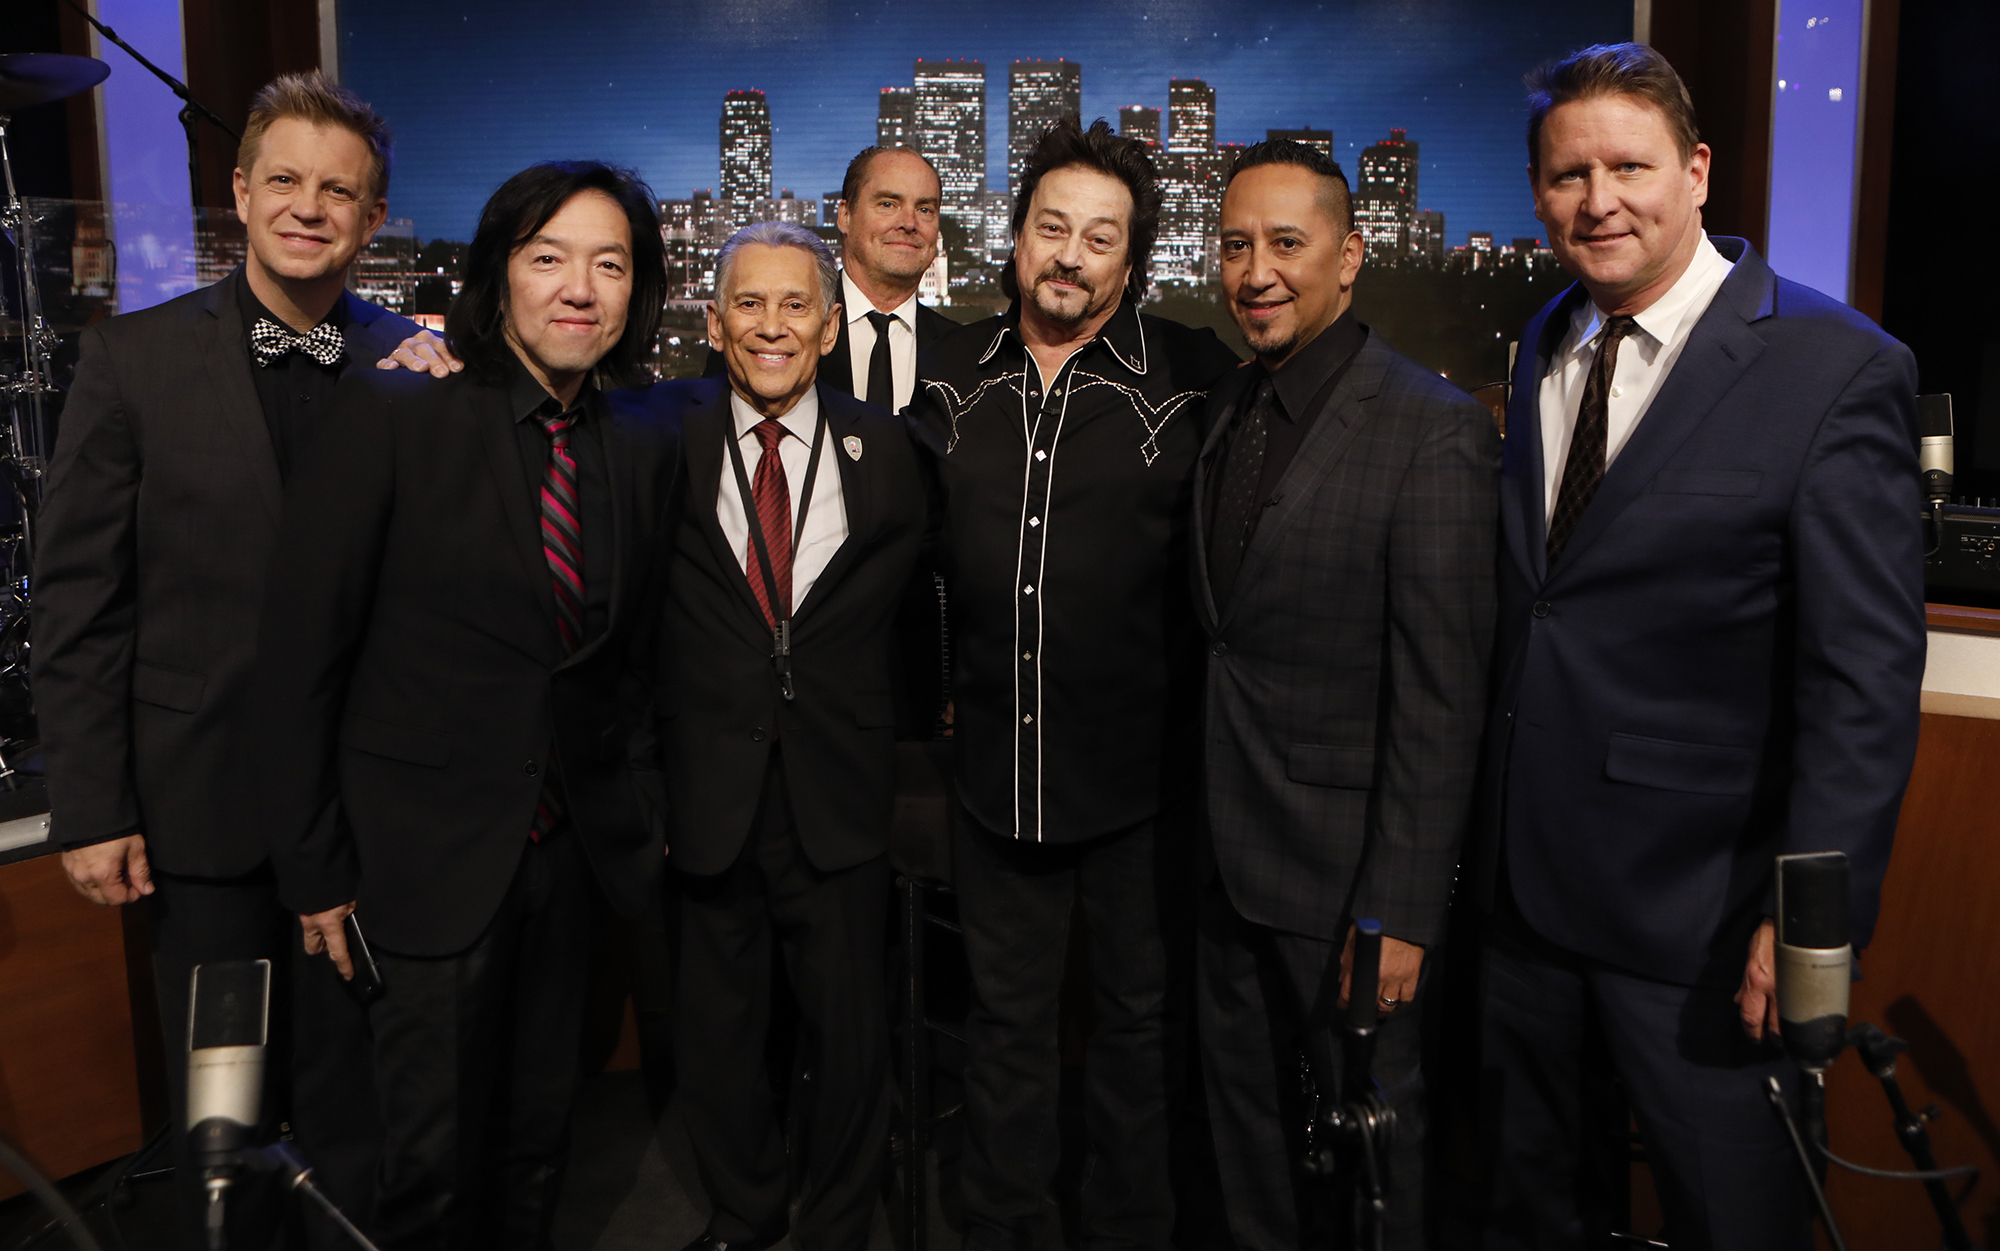 Tom MacLear with Cleto & The Cletones Jimmy Kimmel Live